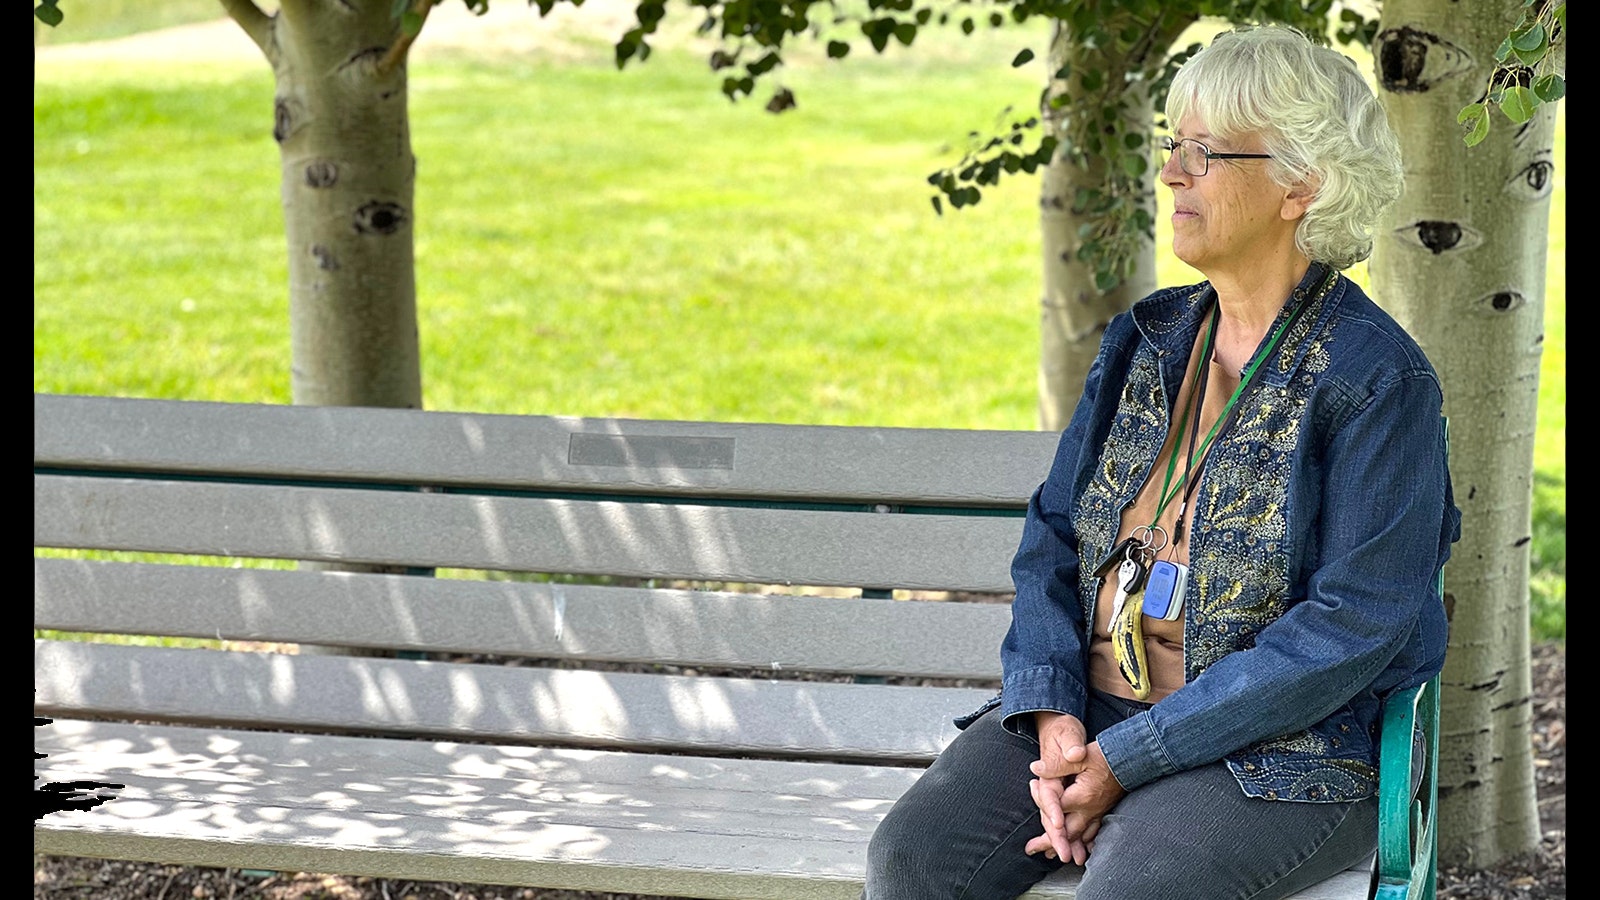 Wendy Bidstrup sits on a bench in the park area across the street from her home in Laramie where she met David Leyba.